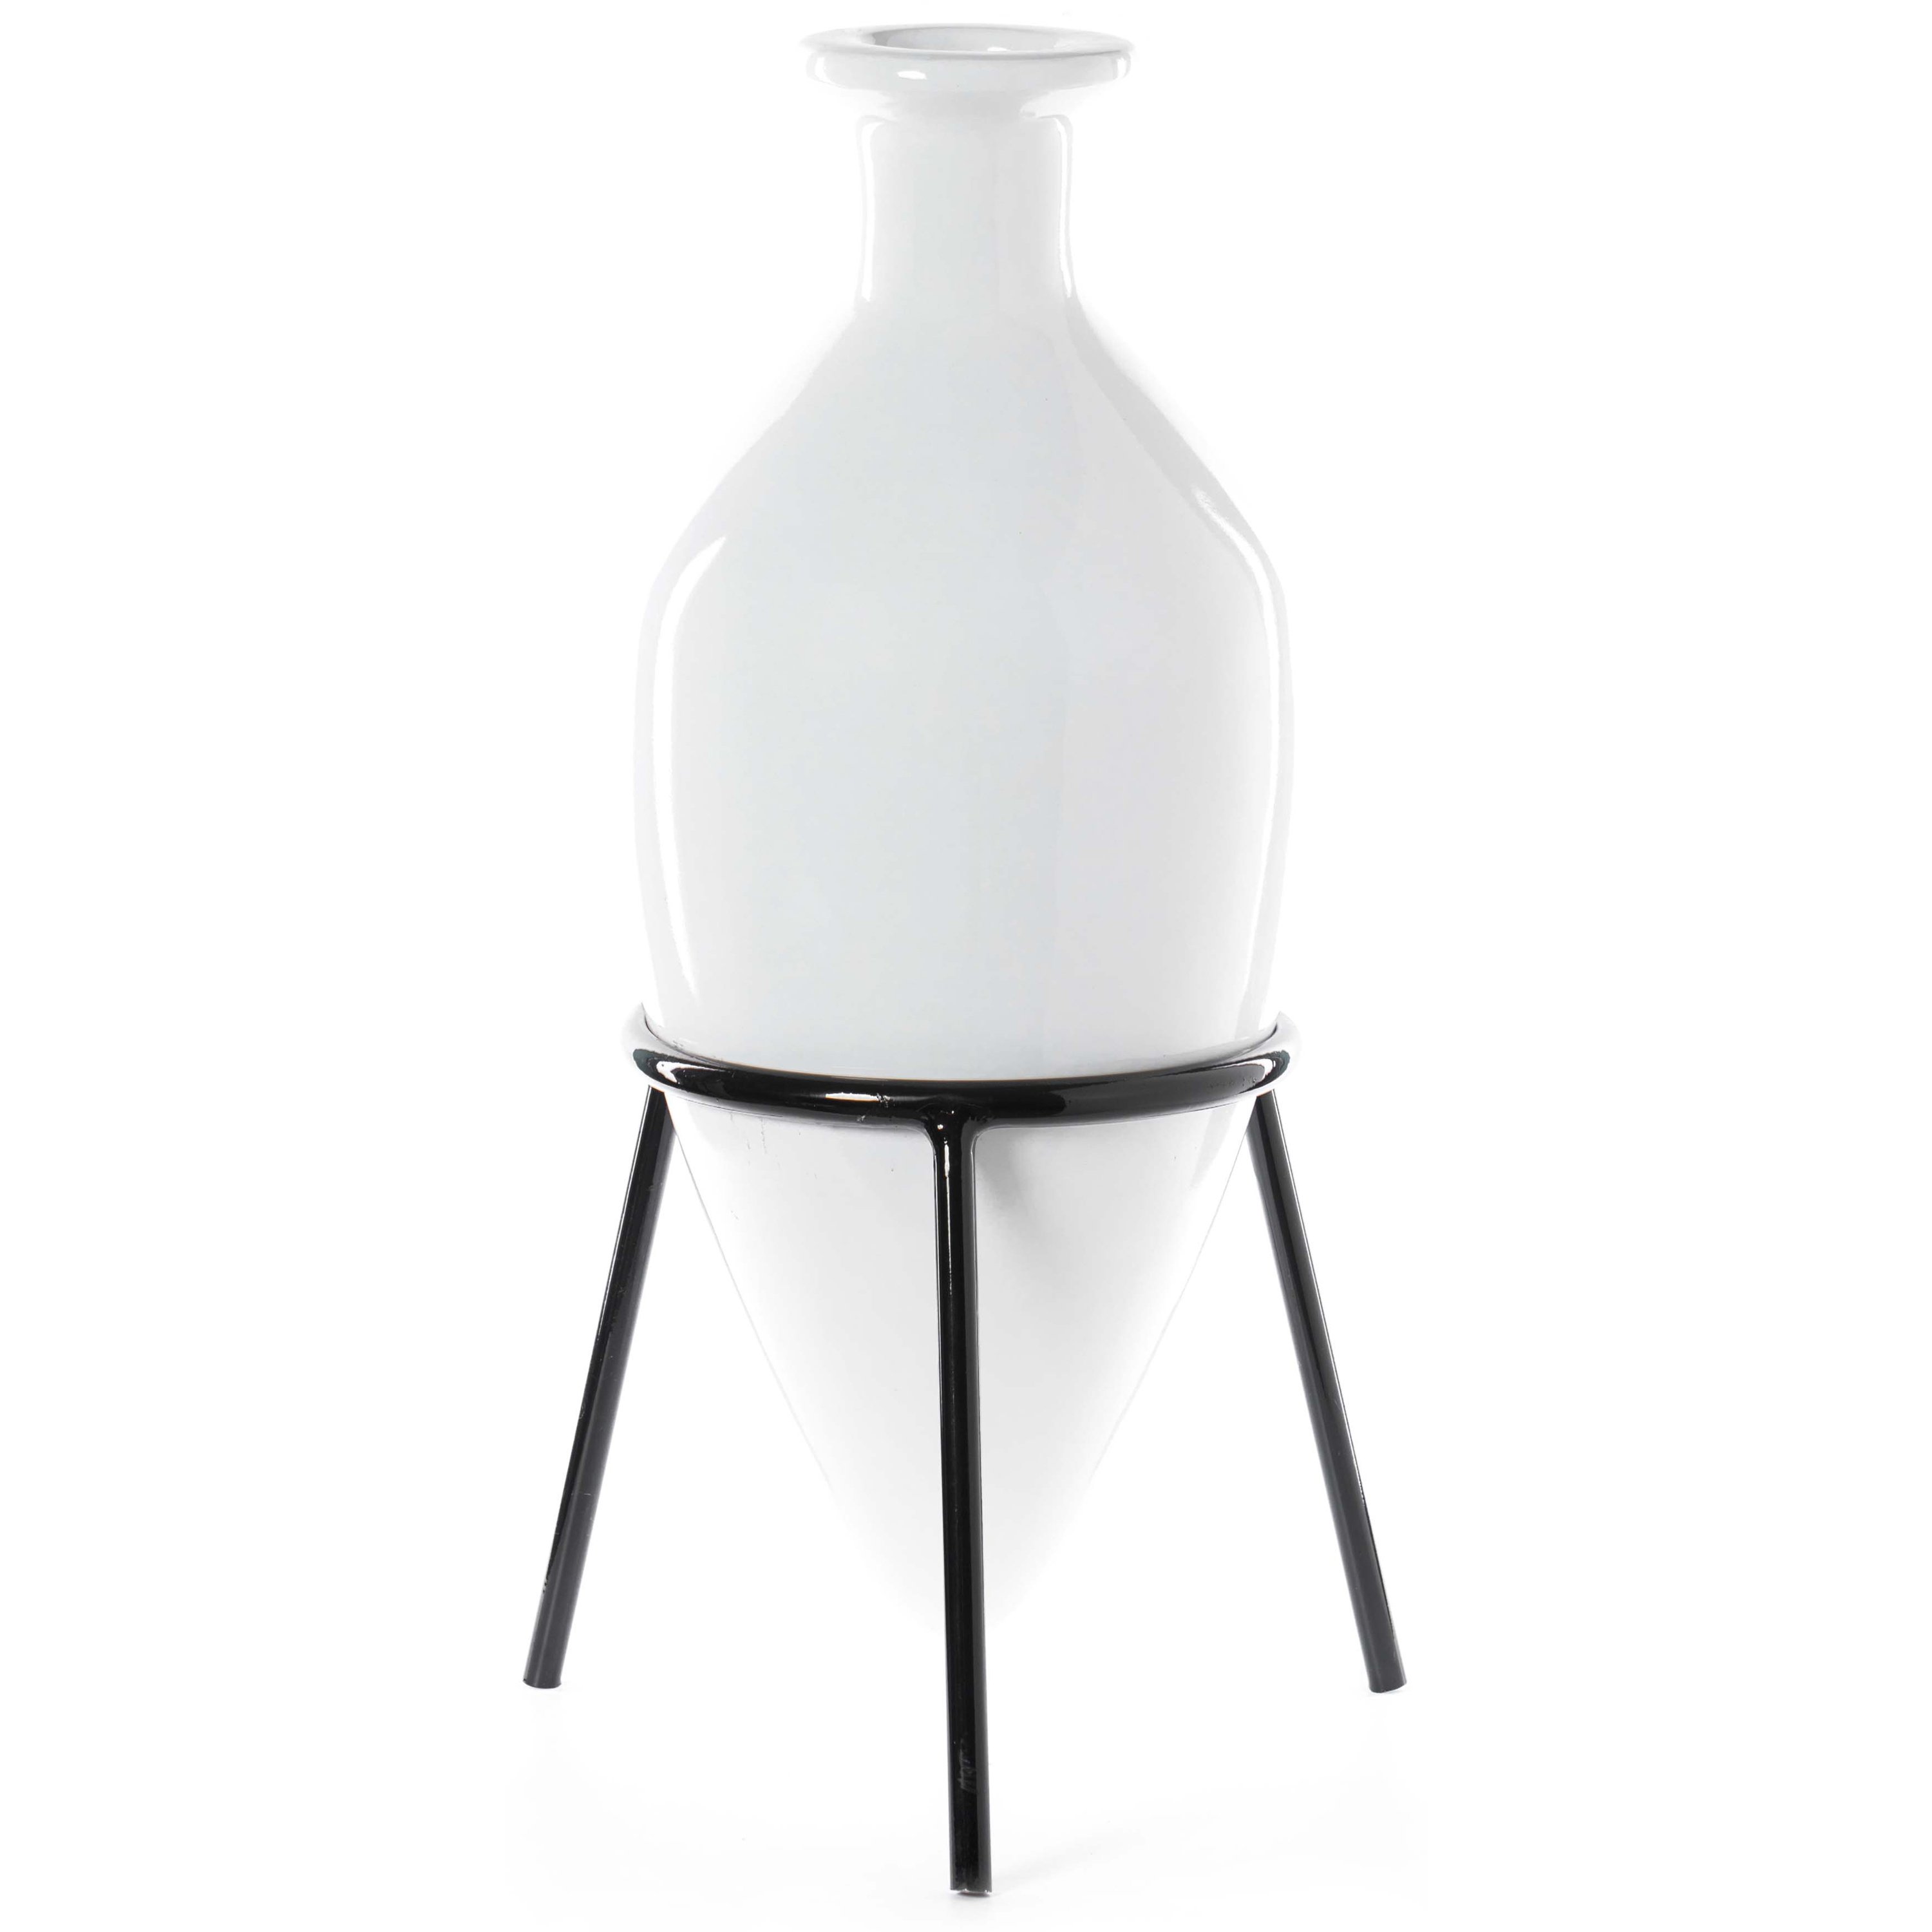 Antique Style Vase, Old Fashioned Amphora, Decorative Large Tall Unique Vase On Slim Black Metal Tripod Stand, 32-Inch-Tall White